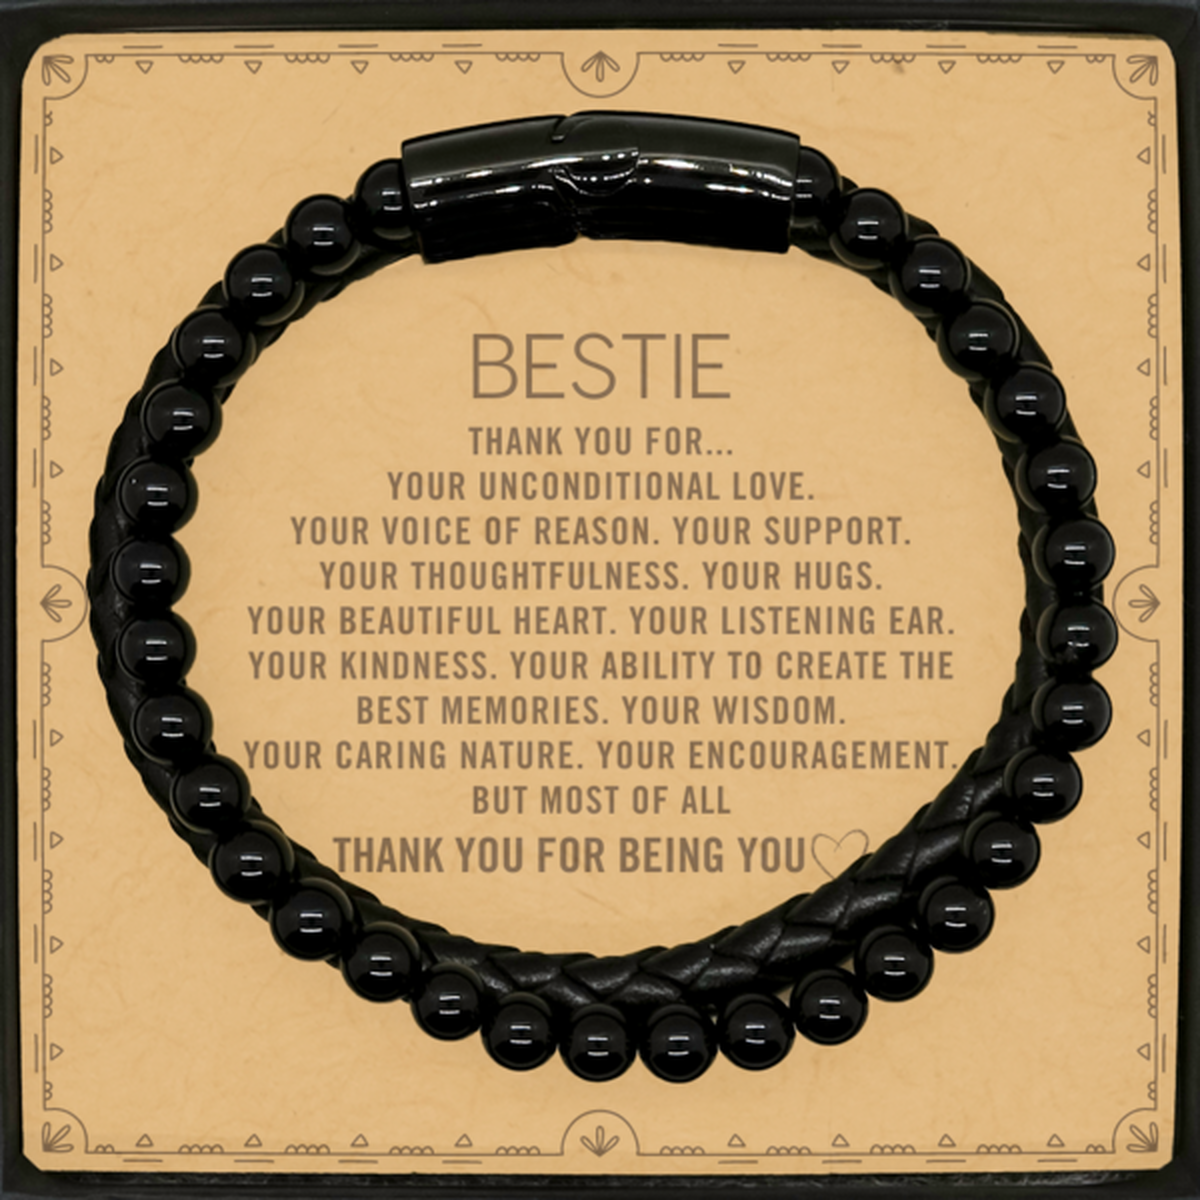 Bestie Stone Leather Bracelets Custom, Message Card Gifts For Bestie Christmas Graduation Birthday Gifts for Men Women Bestie Thank you for Your unconditional love